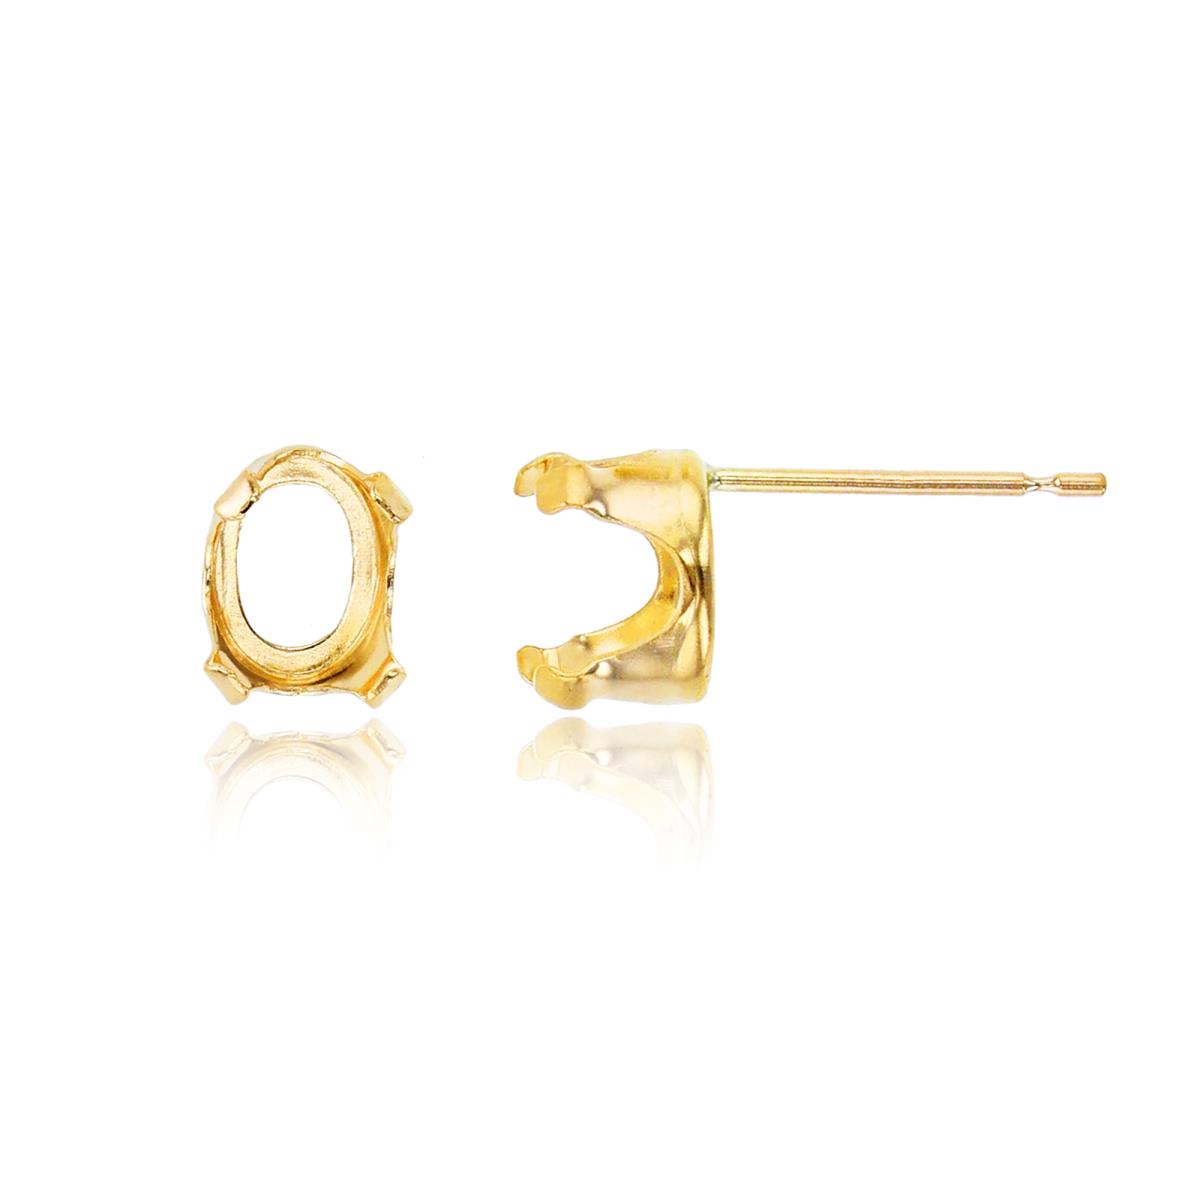 10K Yellow Gold 5x3mm Oval 4-Prong Stud Finding (PR)